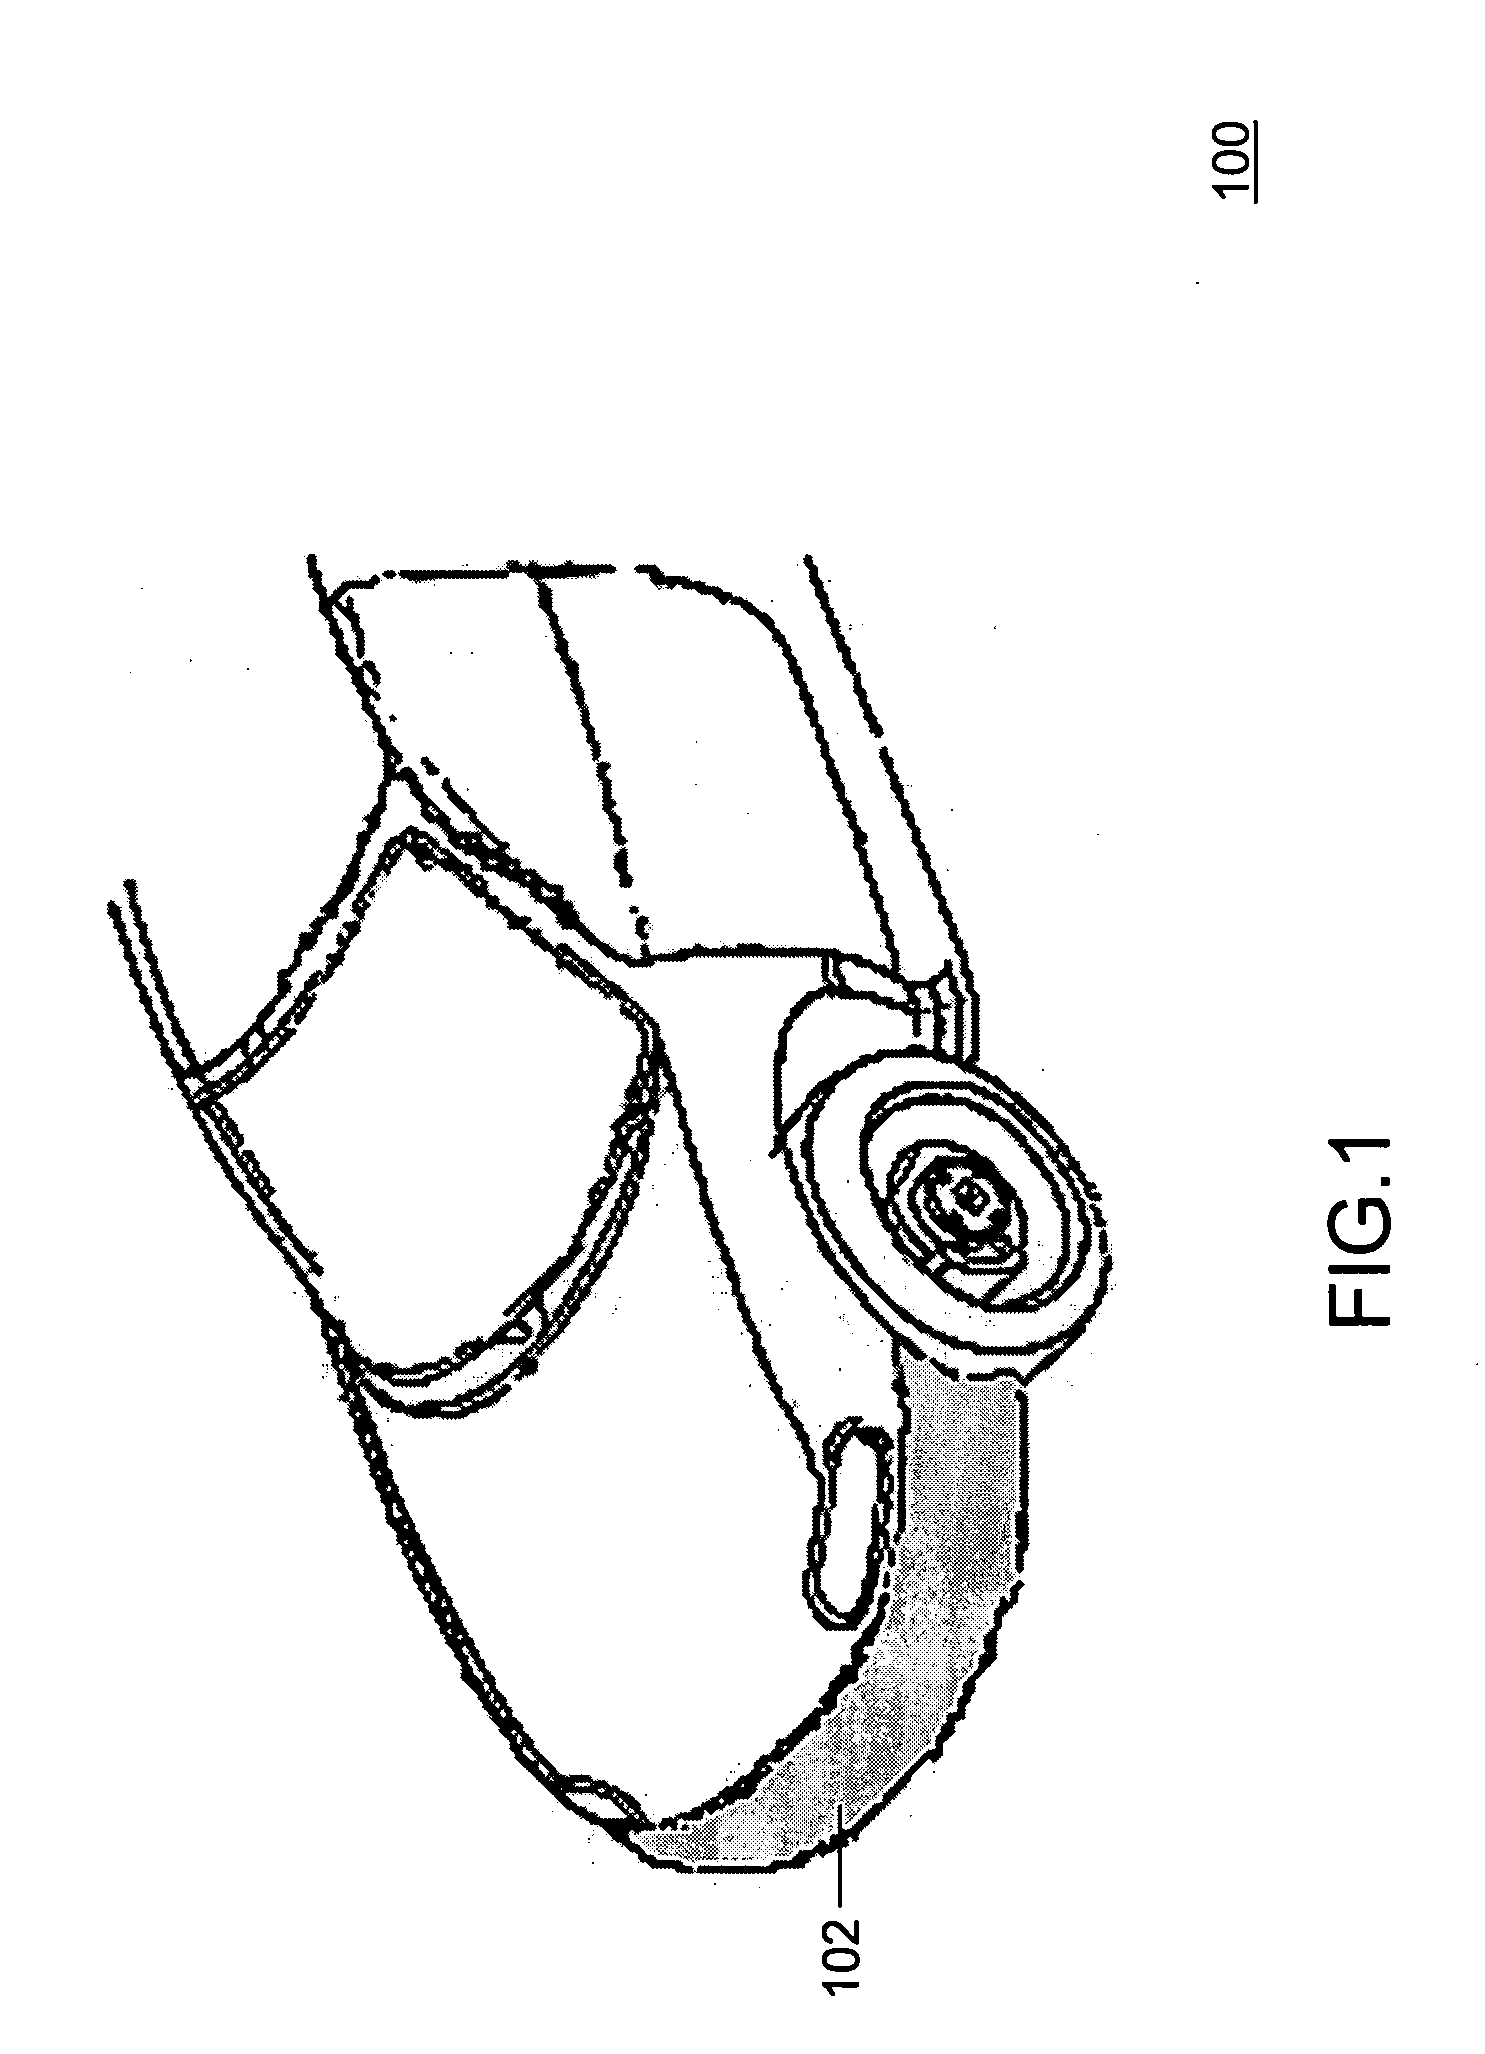 Bumper-beam for an automobile